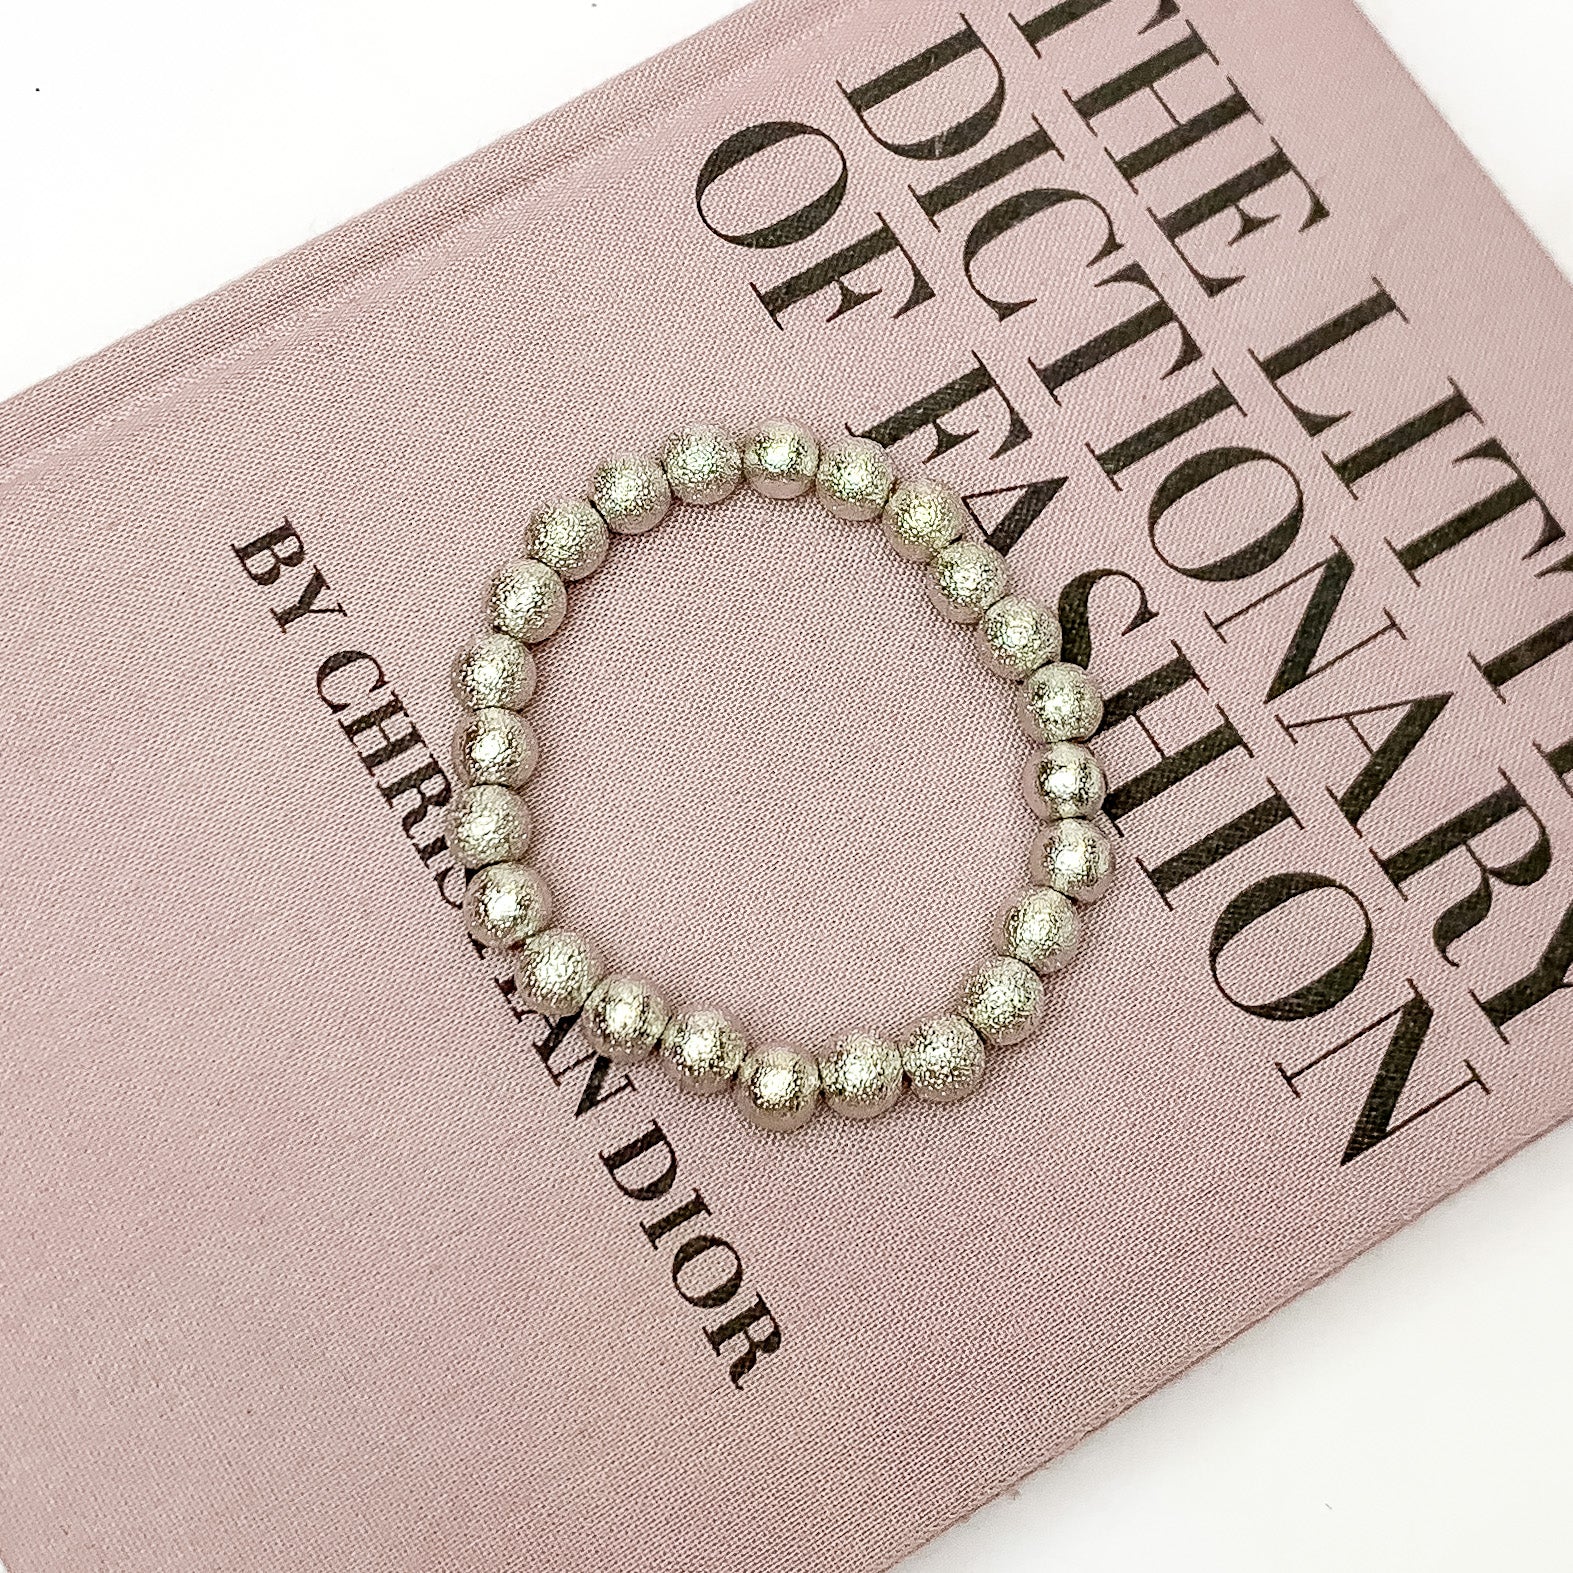 Silver Tone Basic Beaded Bracelet. Pictured laying on top of a closed book. The book is on a white background.